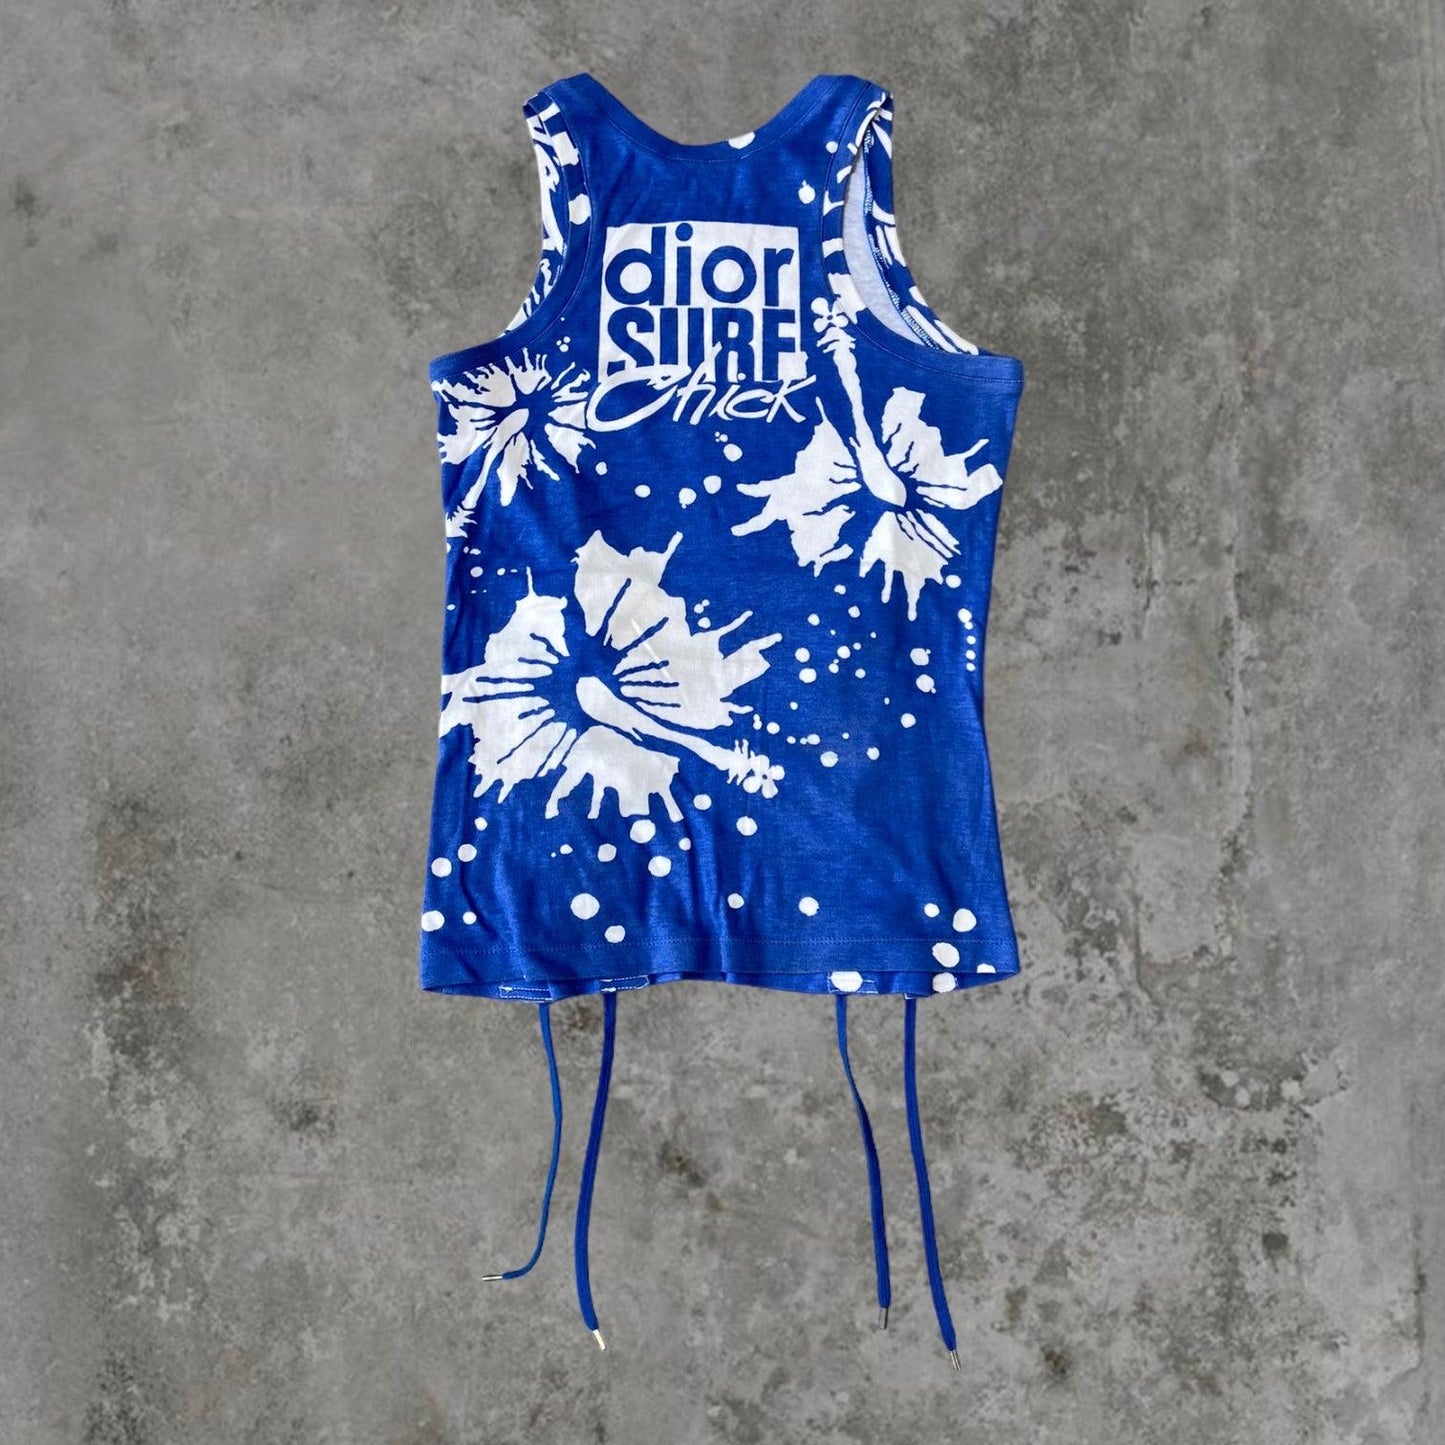 DIOR SS04 "SURF CHICK" TANK TOP - S/M - Known Source